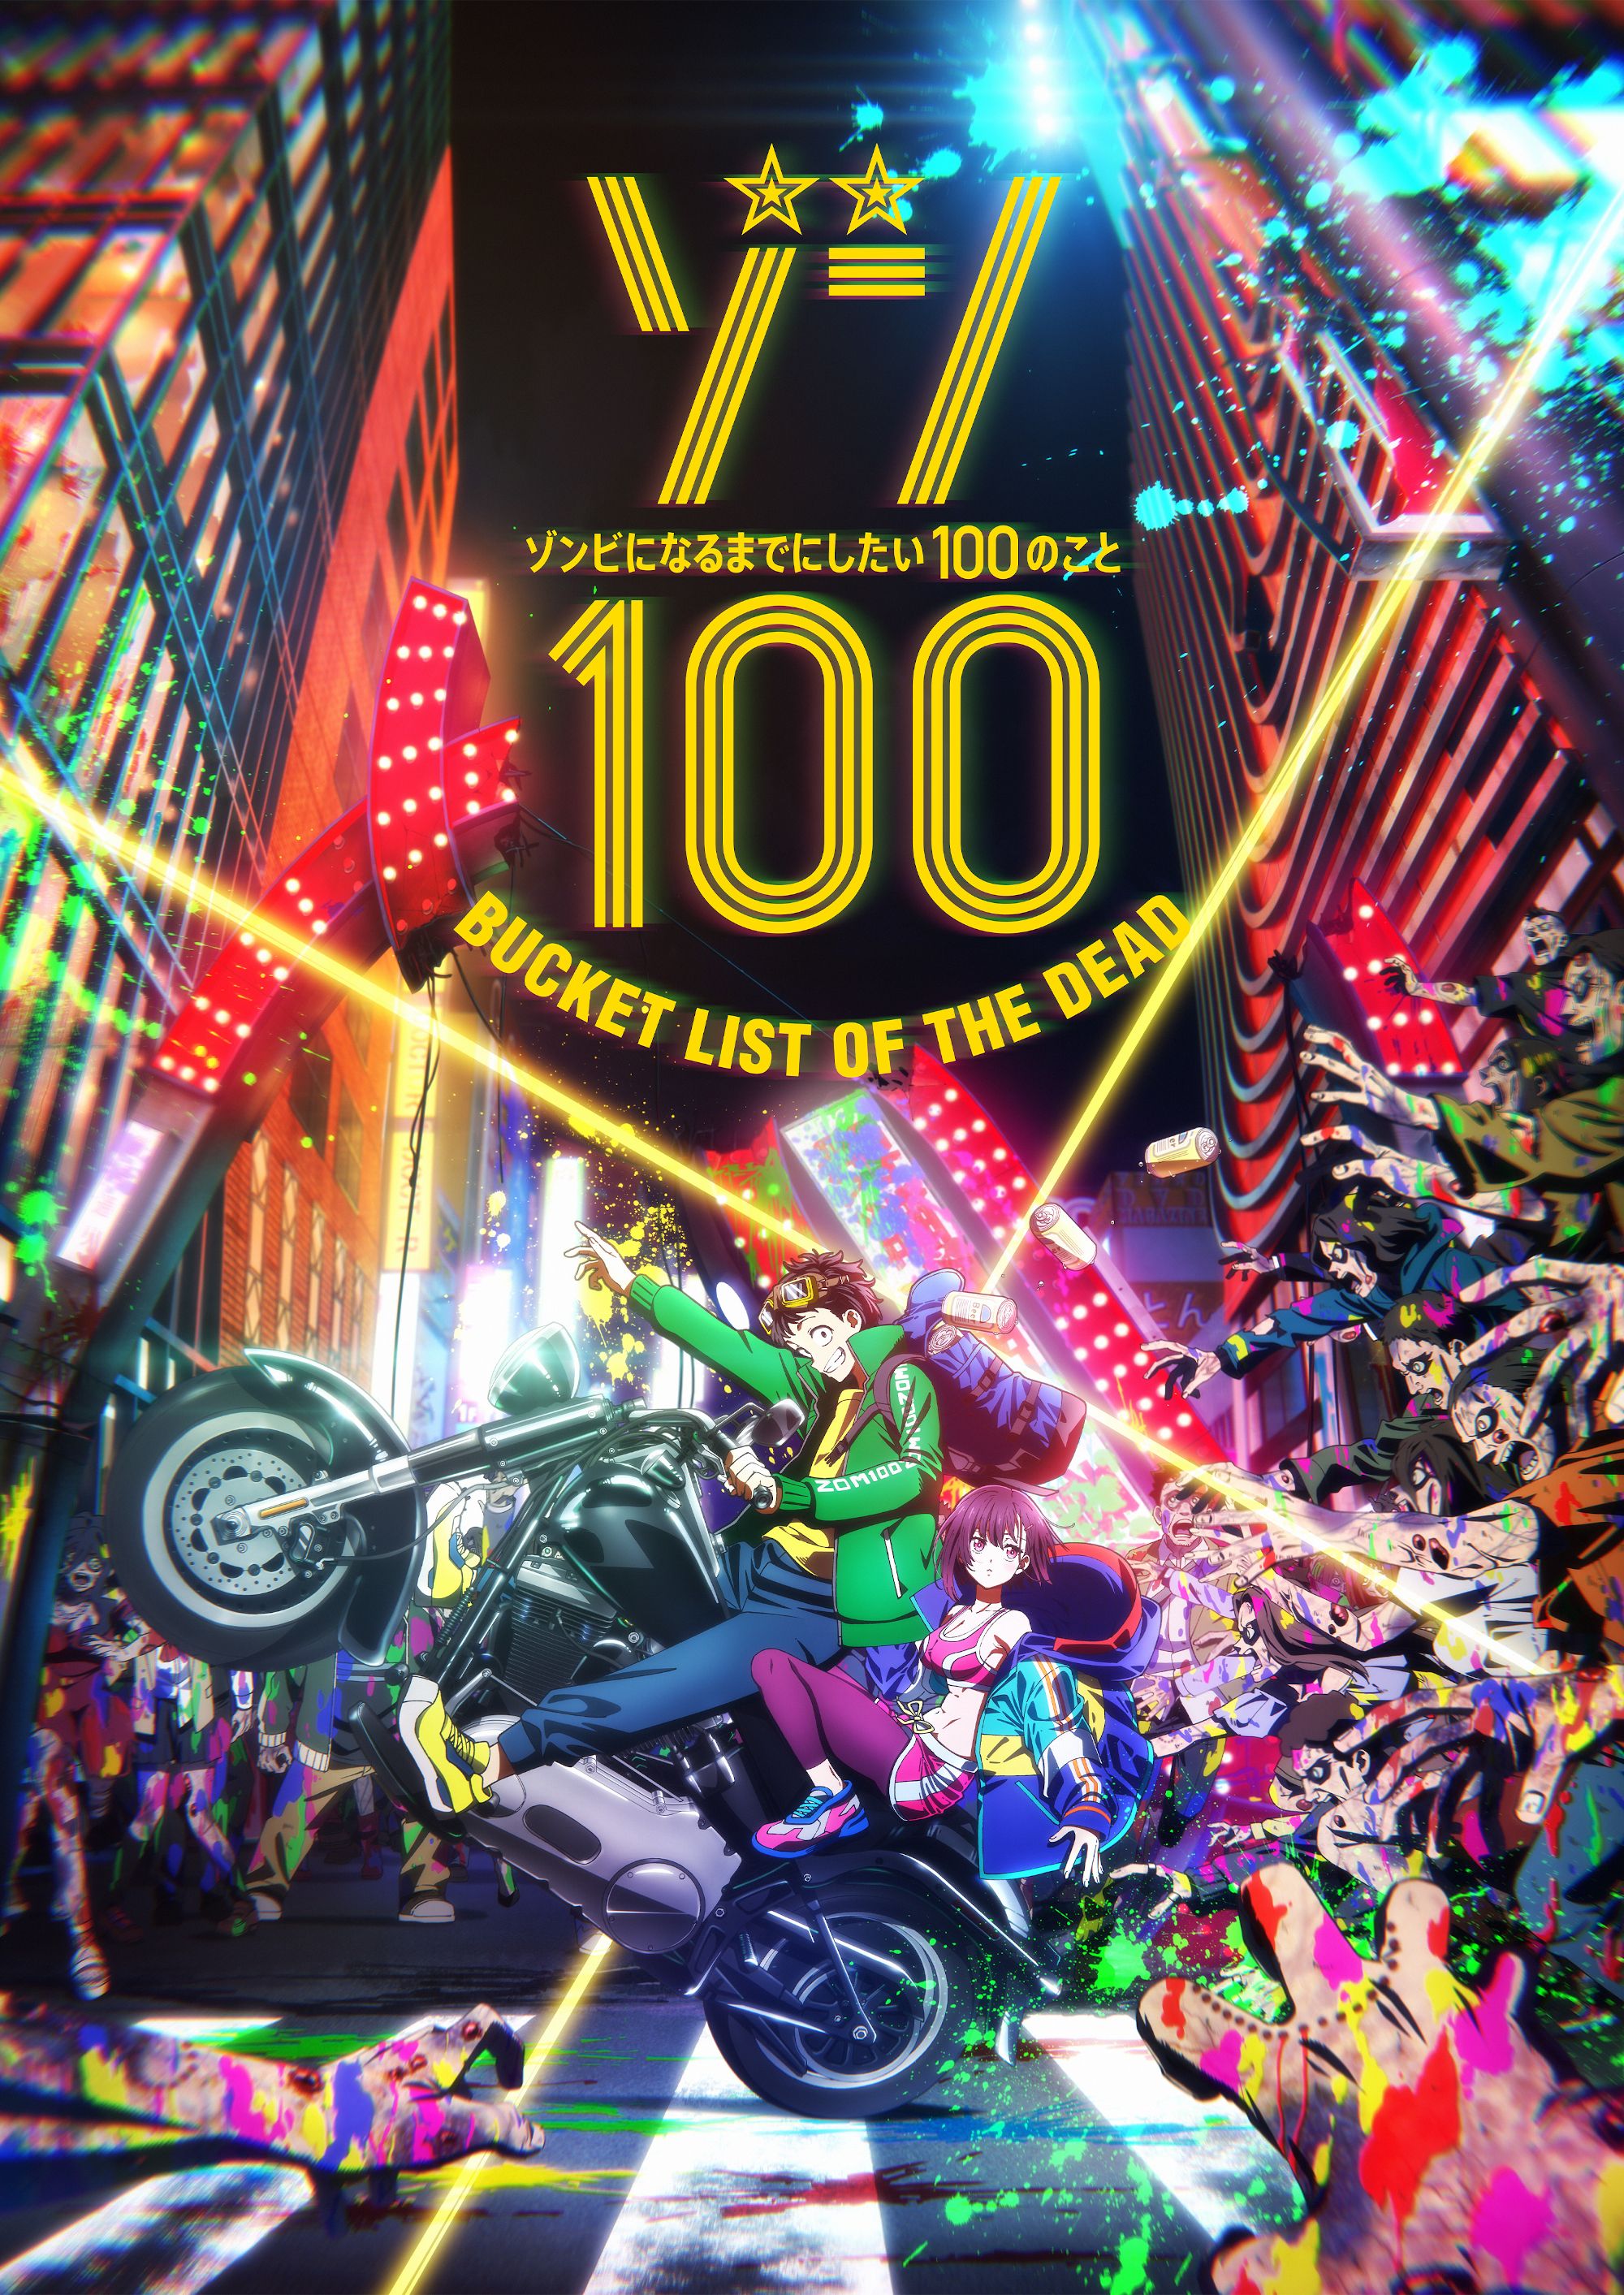 Poster of Zom 100 anime shows main character Akira riding motorcycle with his female friend in a busy city street filled with zombies and vibrant colors and lights in the background.